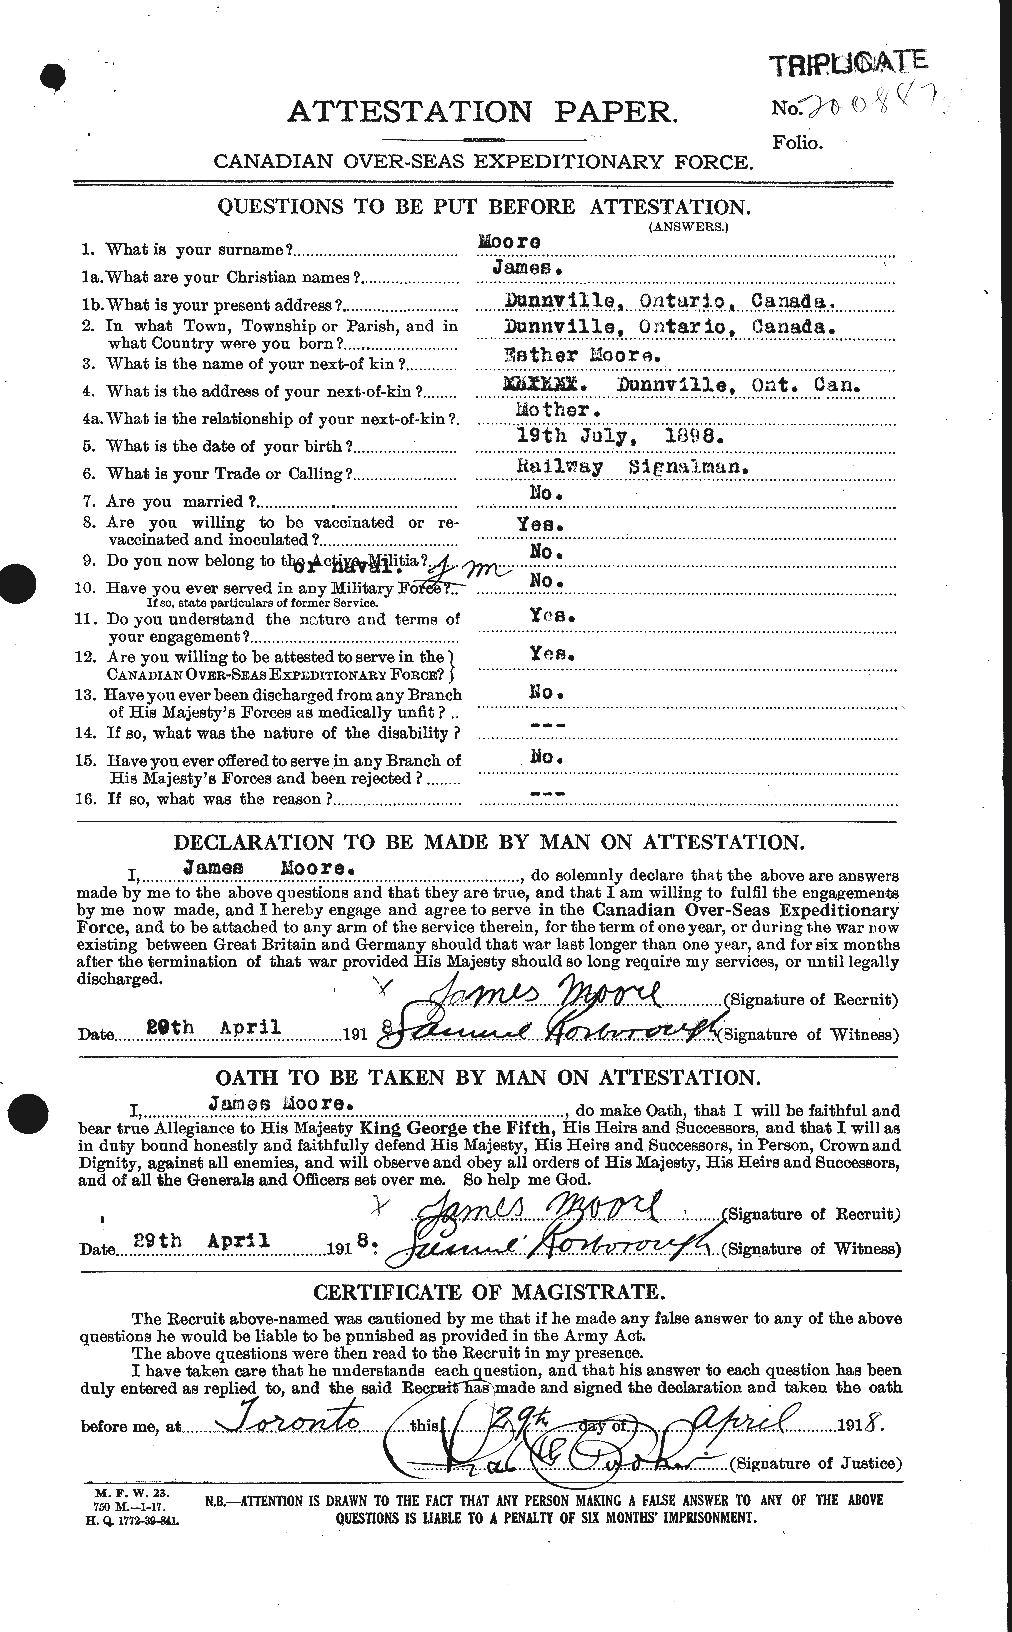 Personnel Records of the First World War - CEF 502189a